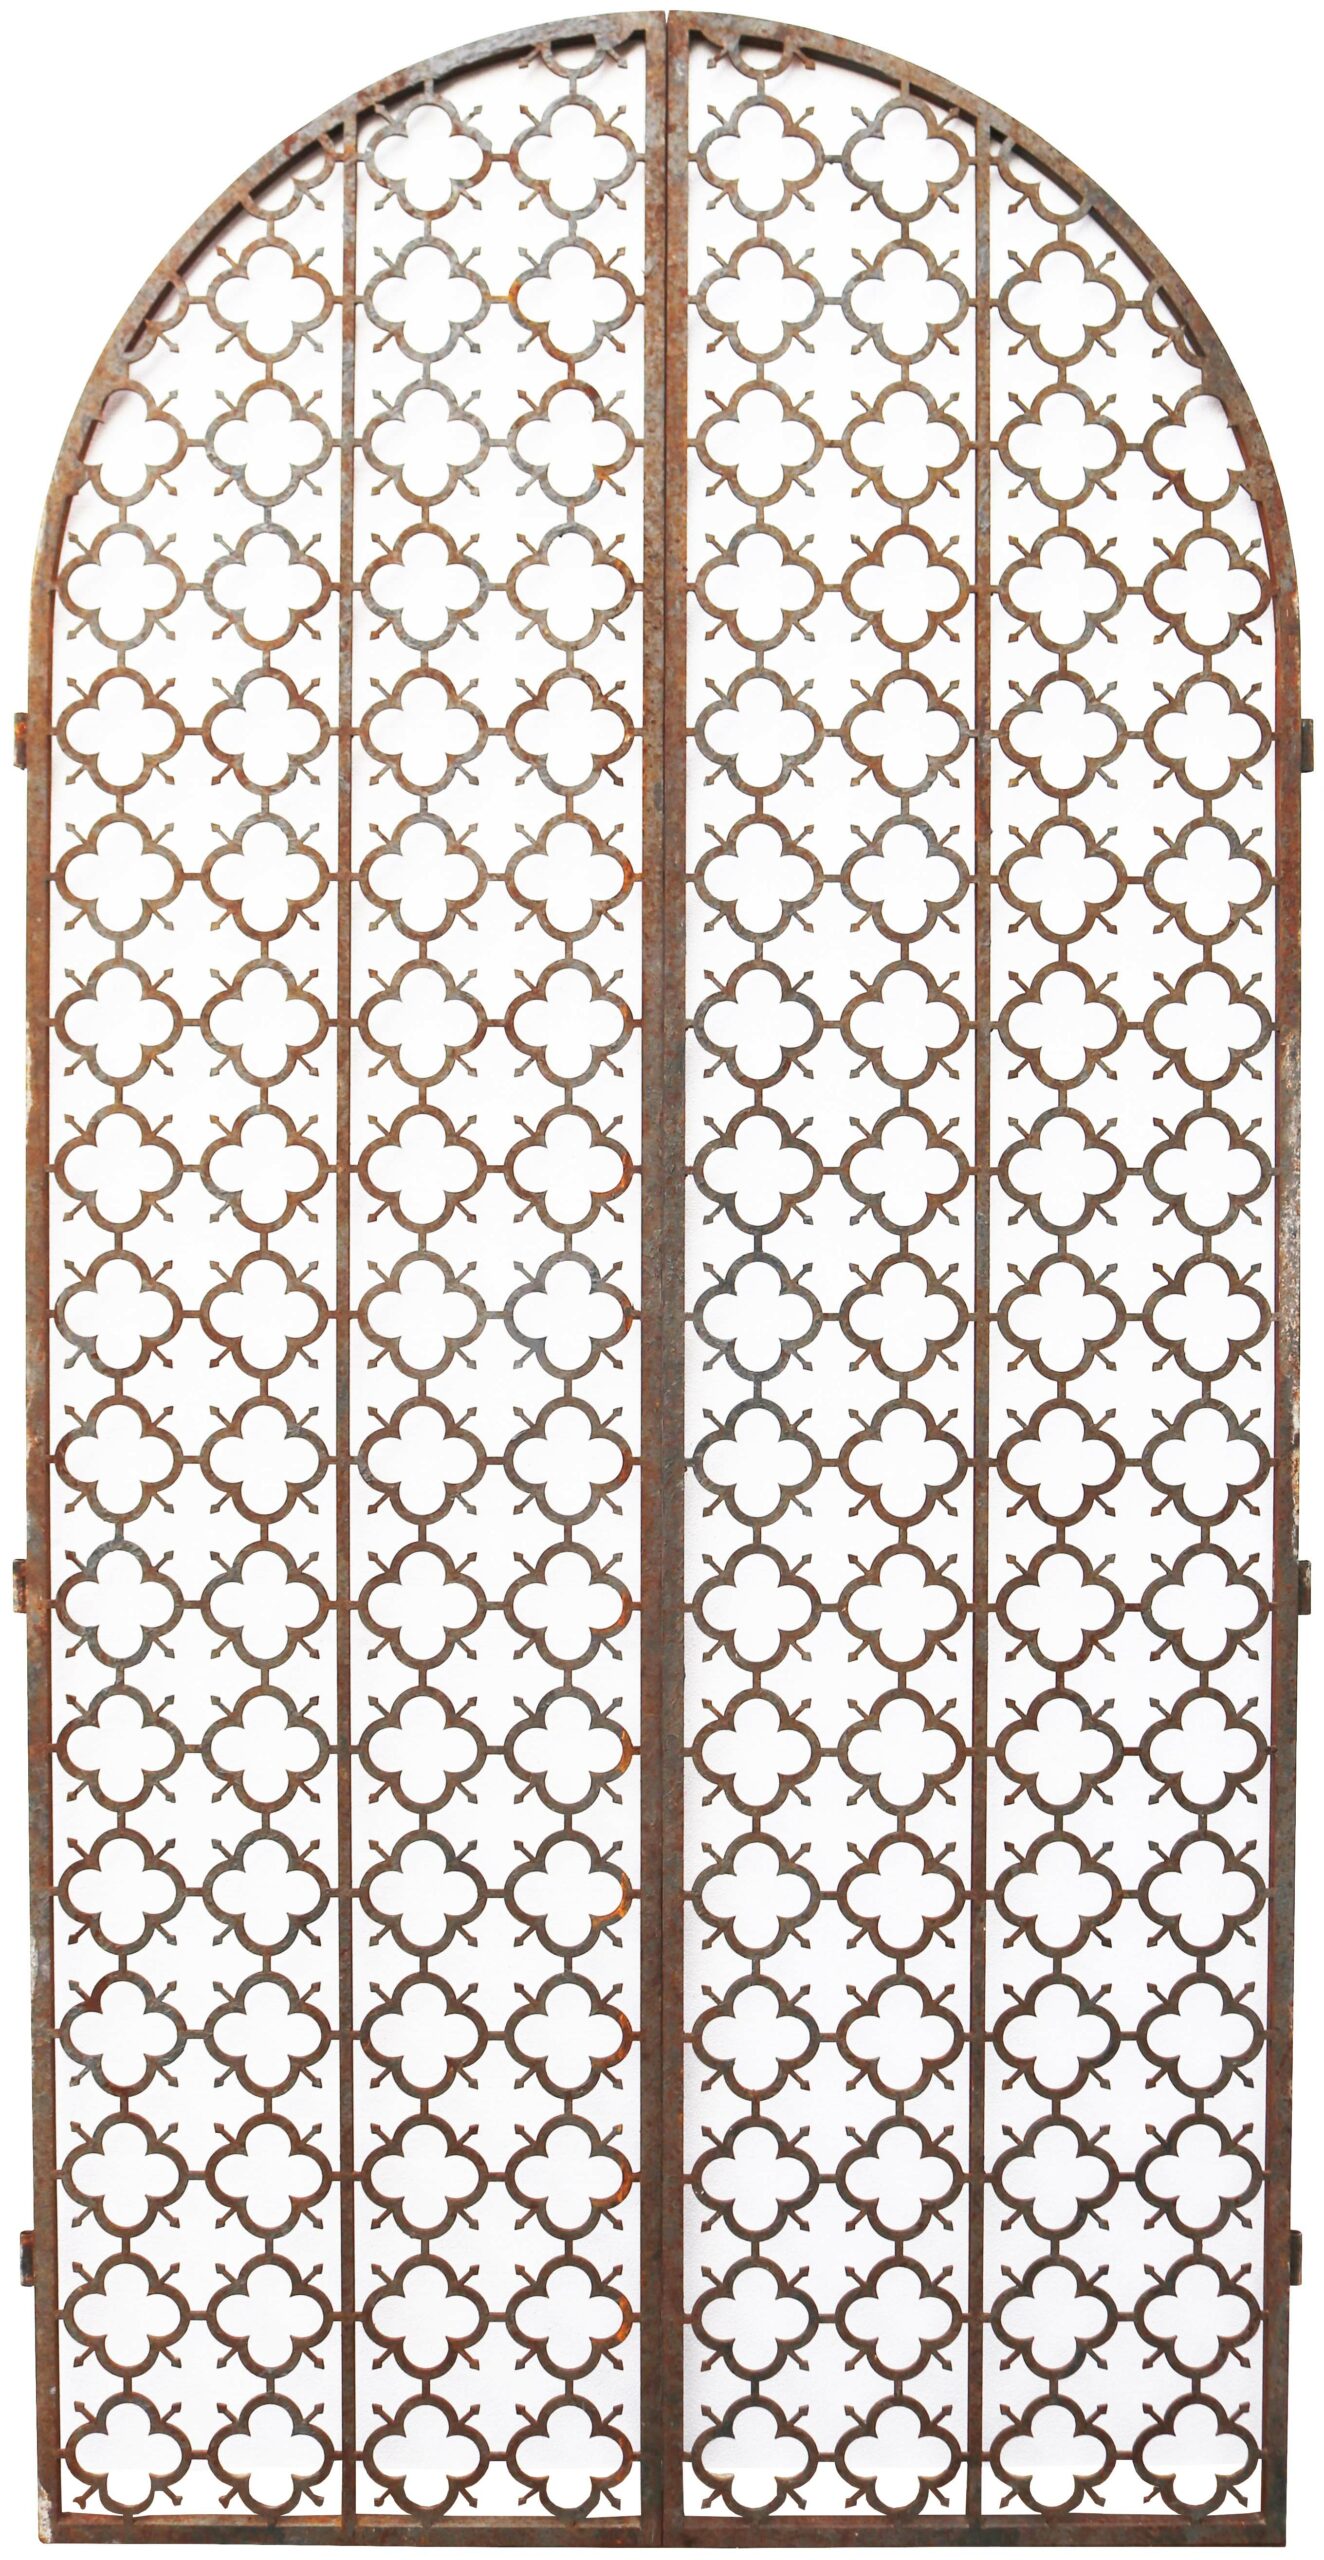 Pair of Tall Arched Metal Side Gates